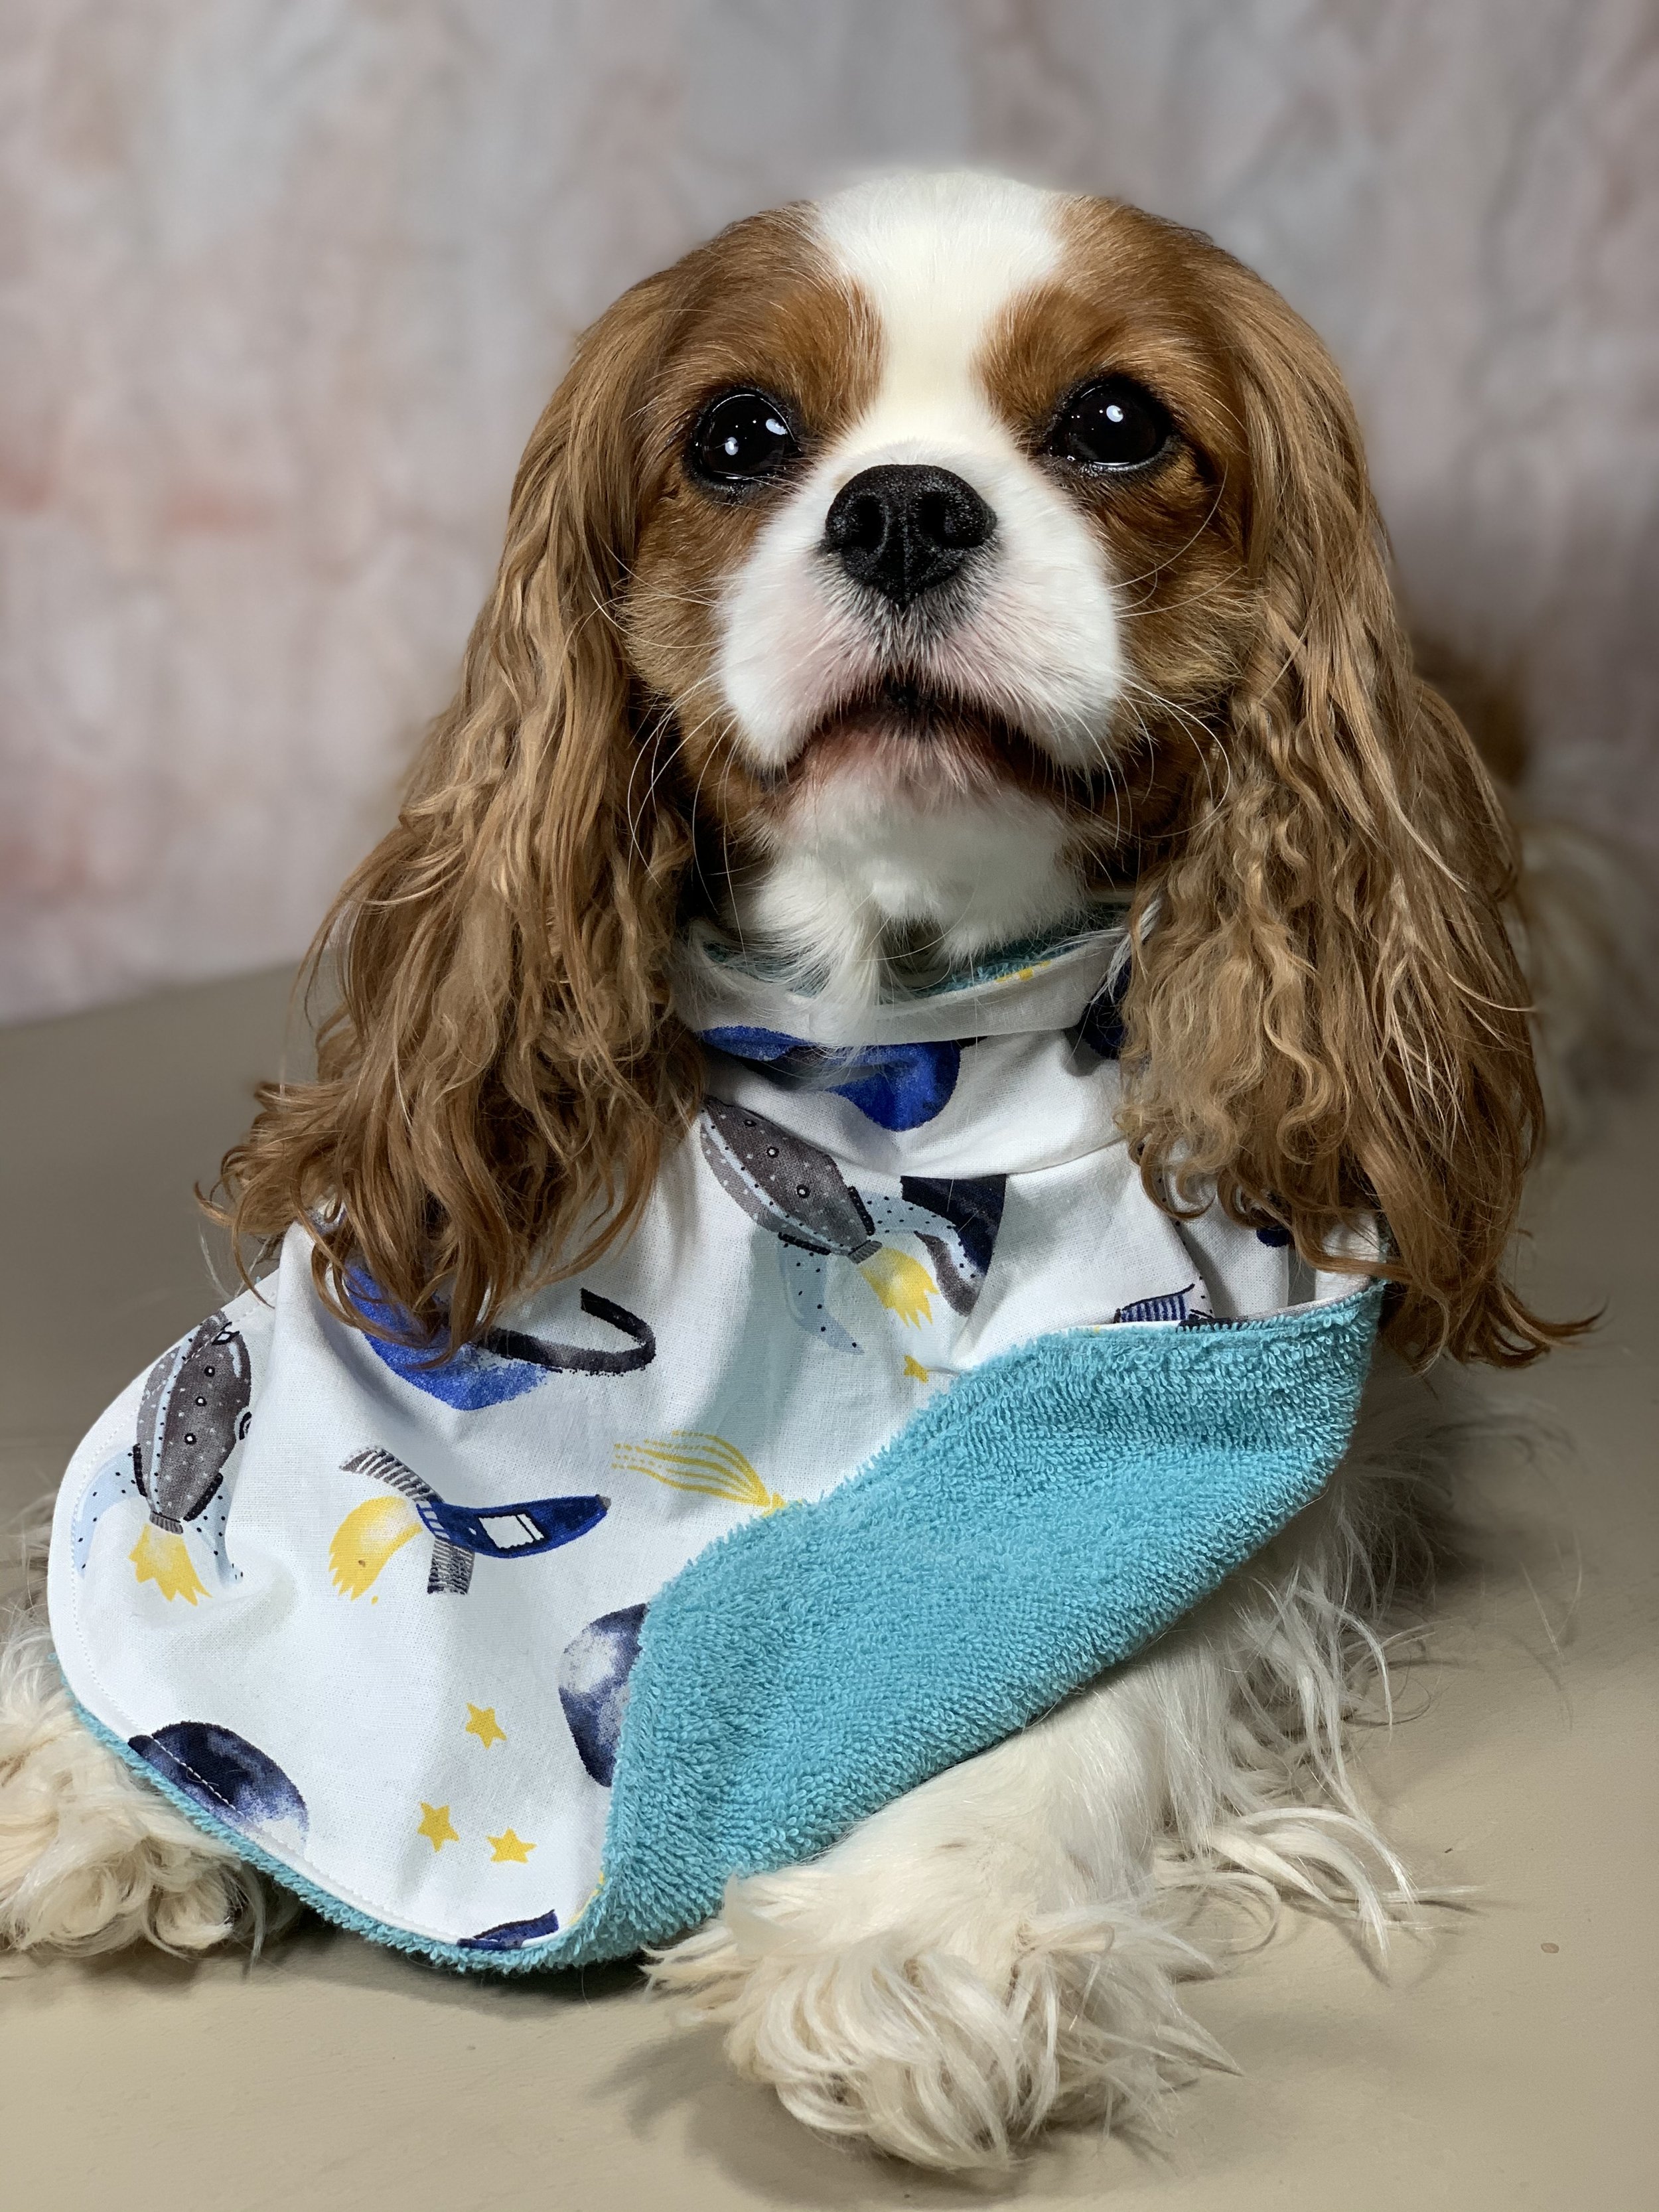 Harley showing the Reversible side - Soft, Absorbent Terrycloth in Teal on her Space Pleated Bib